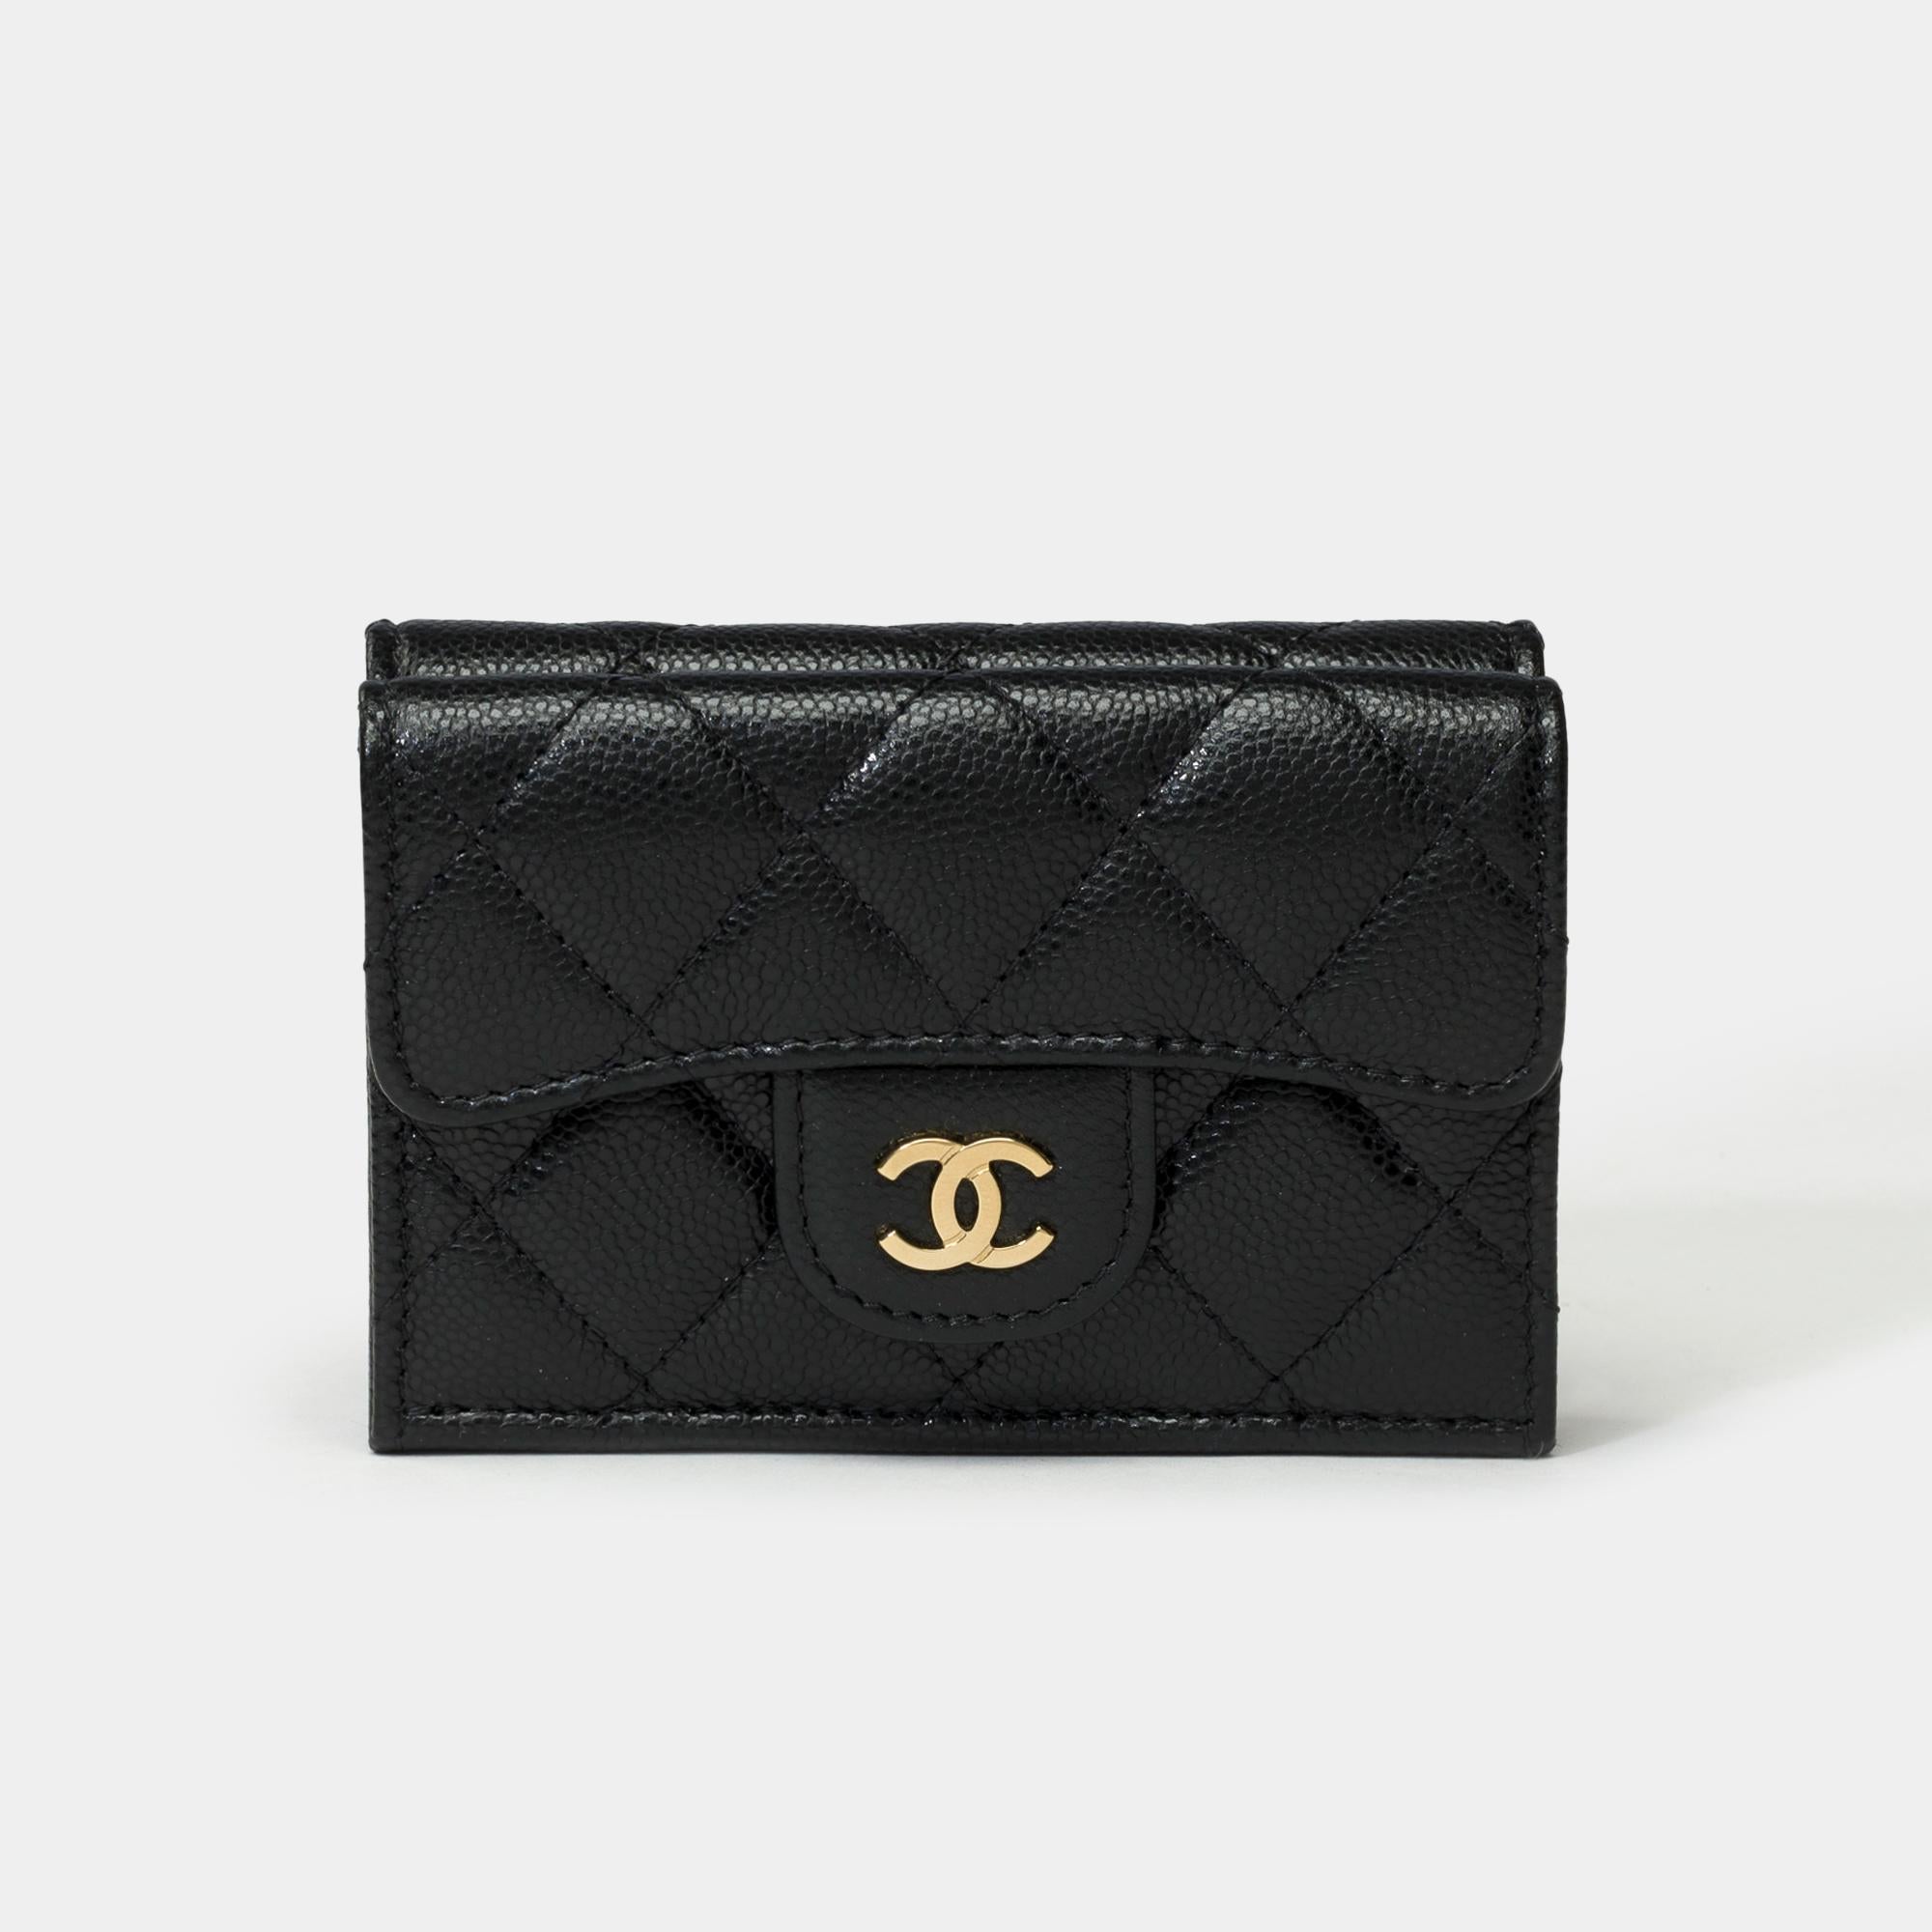 Gorgeous​ ​Chanel​ ​Wallet​ ​in​ ​black​ ​quilted​ ​caviar​ ​leather,​ ​gold​ ​metal​ ​trim

A​ ​flap​ ​compartment​ ​at​ ​the​ ​front​ ​of​ ​the​ ​bag,​ ​snap​ ​closure​ ​CC​ ​logo​ ​in​ ​gold​ ​metal
Shutter​ ​closure​ ​by​ ​silver​ ​metal​ ​snap​